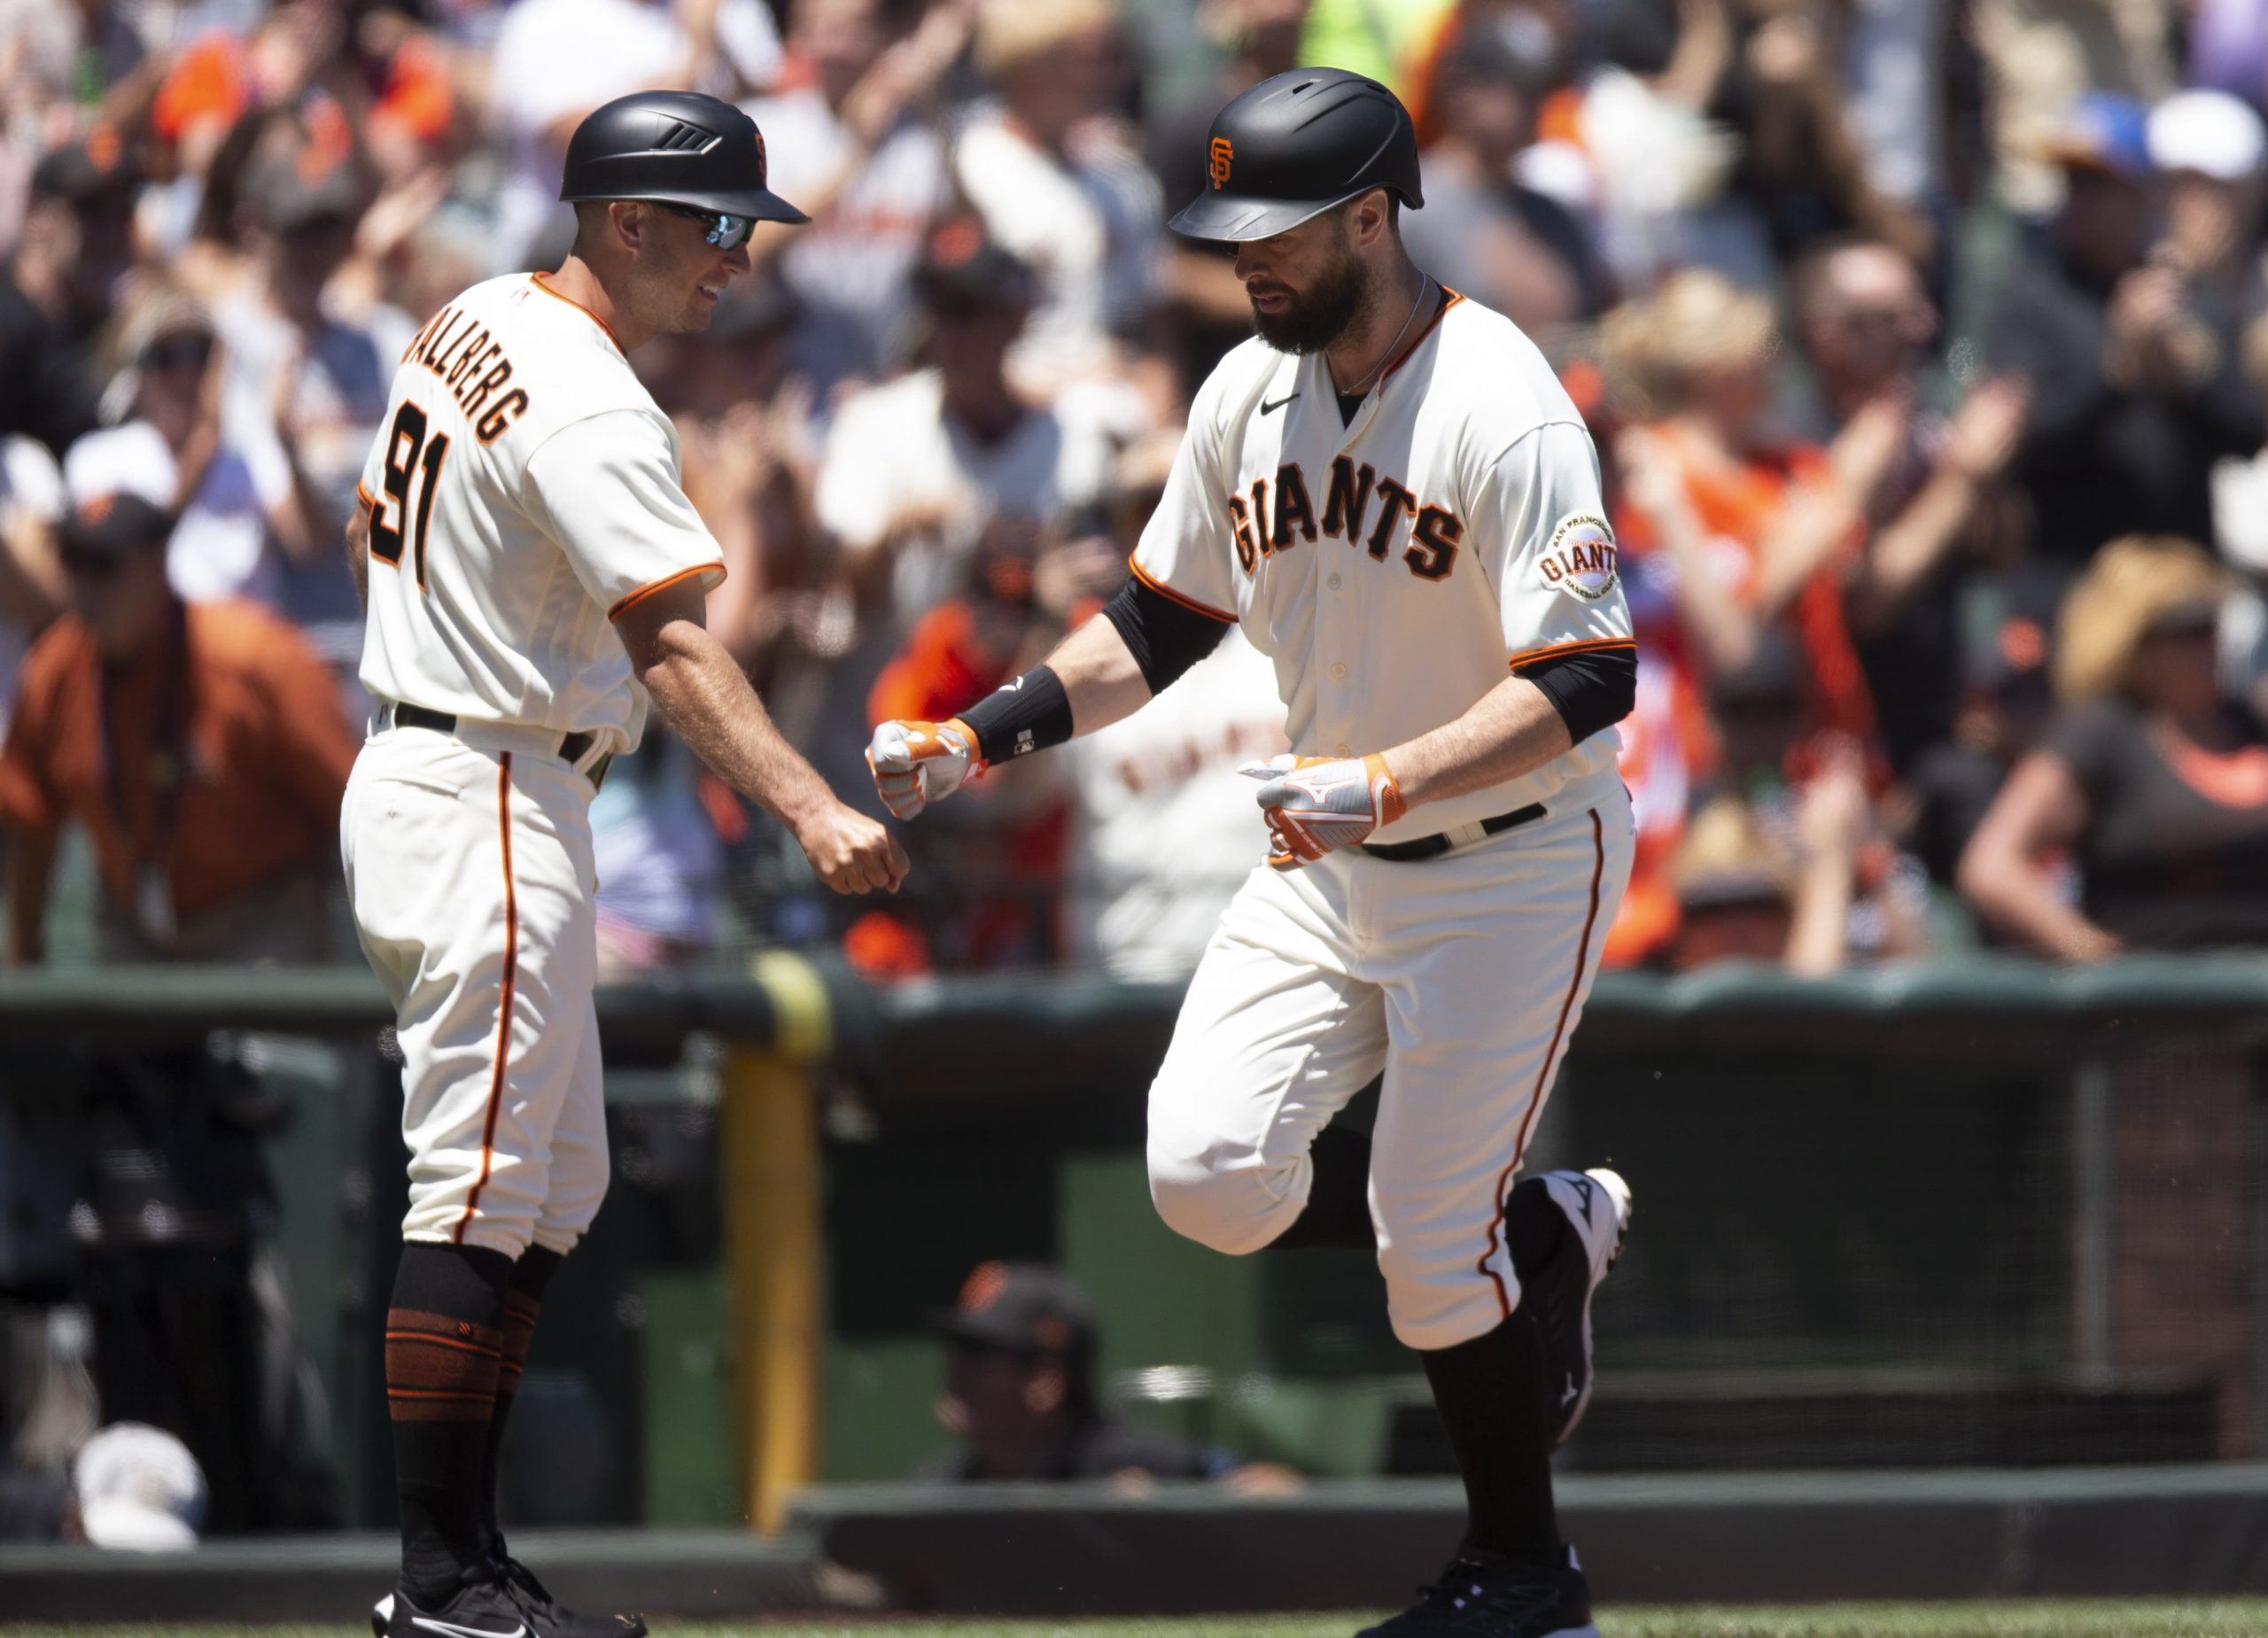 San Francisco Giants designated hitter Brandon Belt (right) celebrates with third base coach Mark Hallberg (91) after hitting a solo home run against the Kansas City Royals in the fourth inning at Oracle Park.